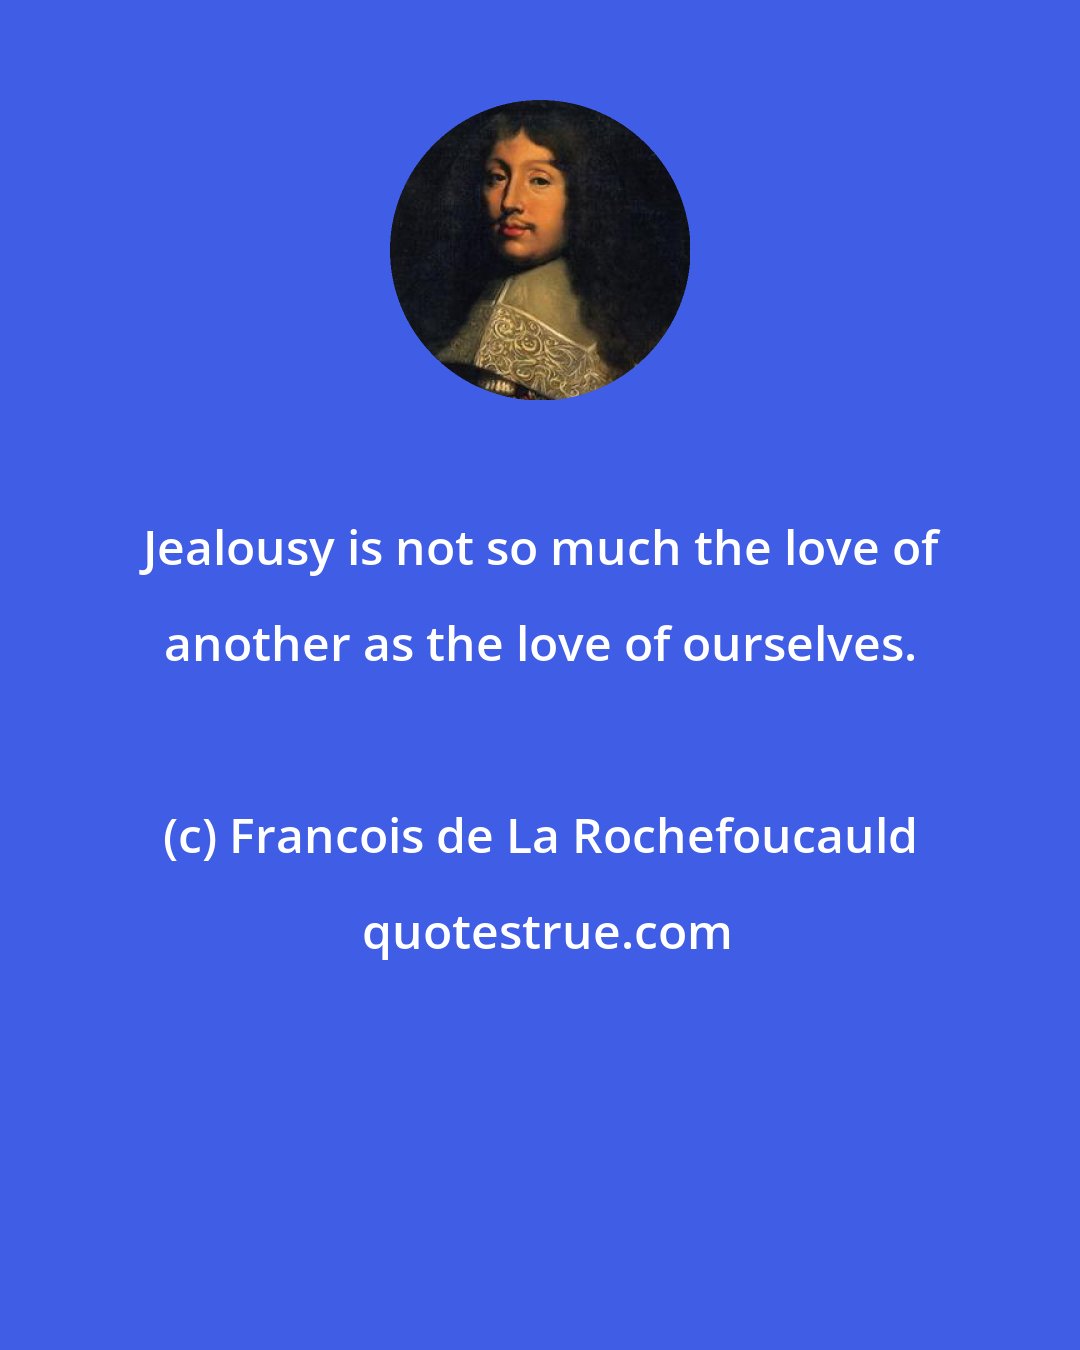 Francois de La Rochefoucauld: Jealousy is not so much the love of another as the love of ourselves.